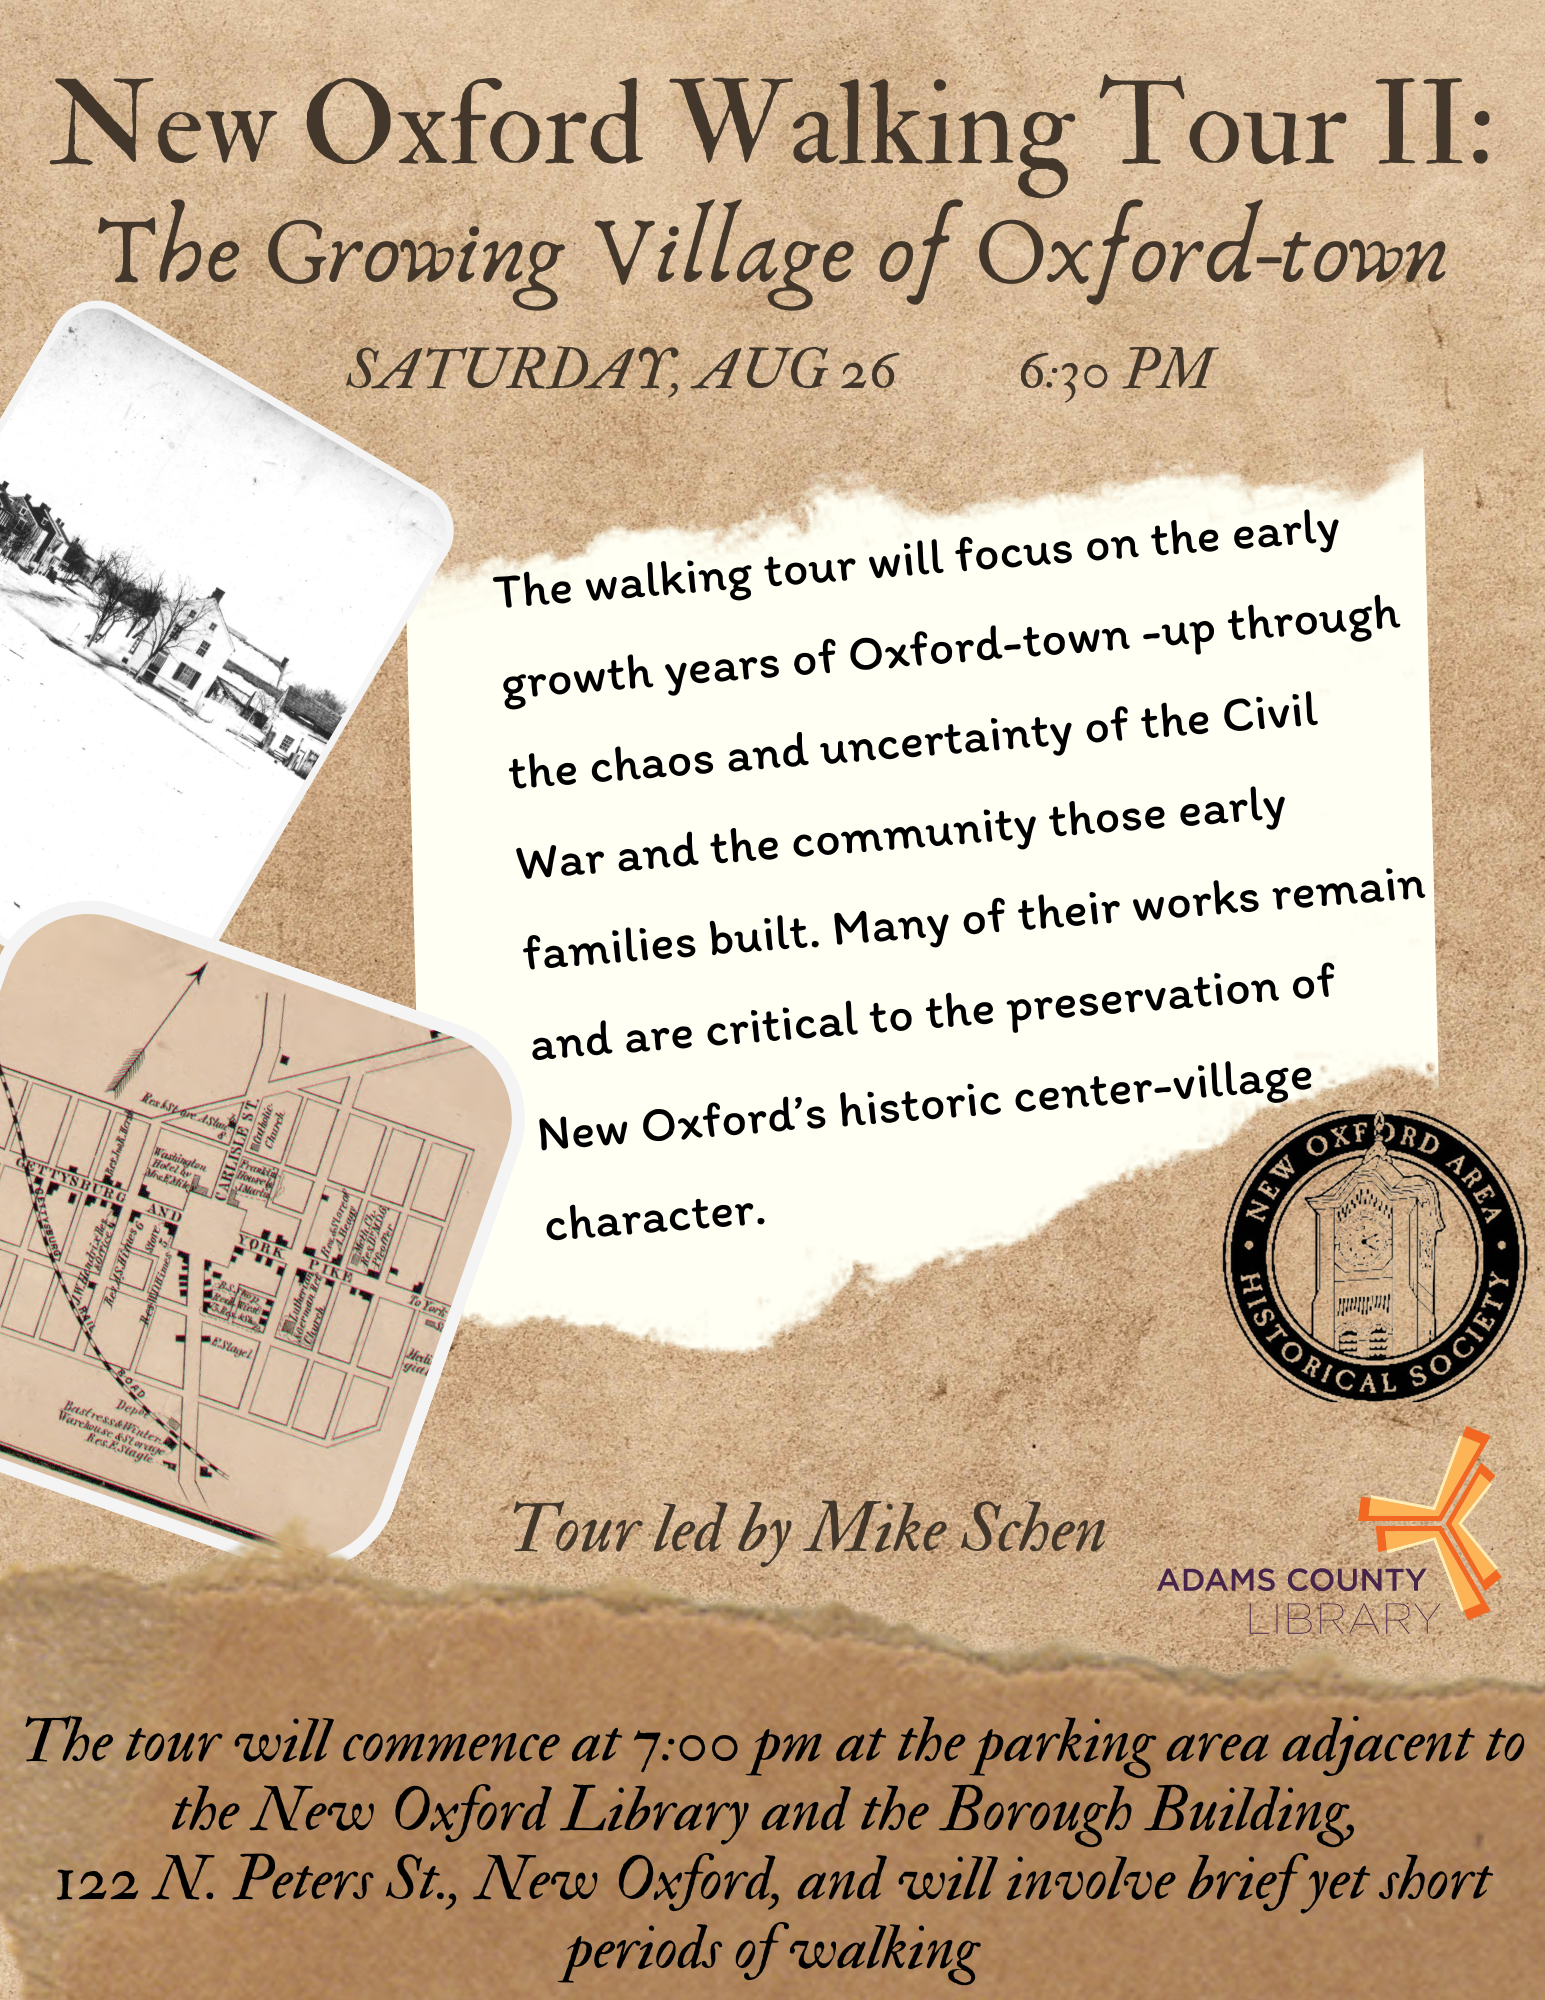 line drawing and map of historic Oxford-town locations